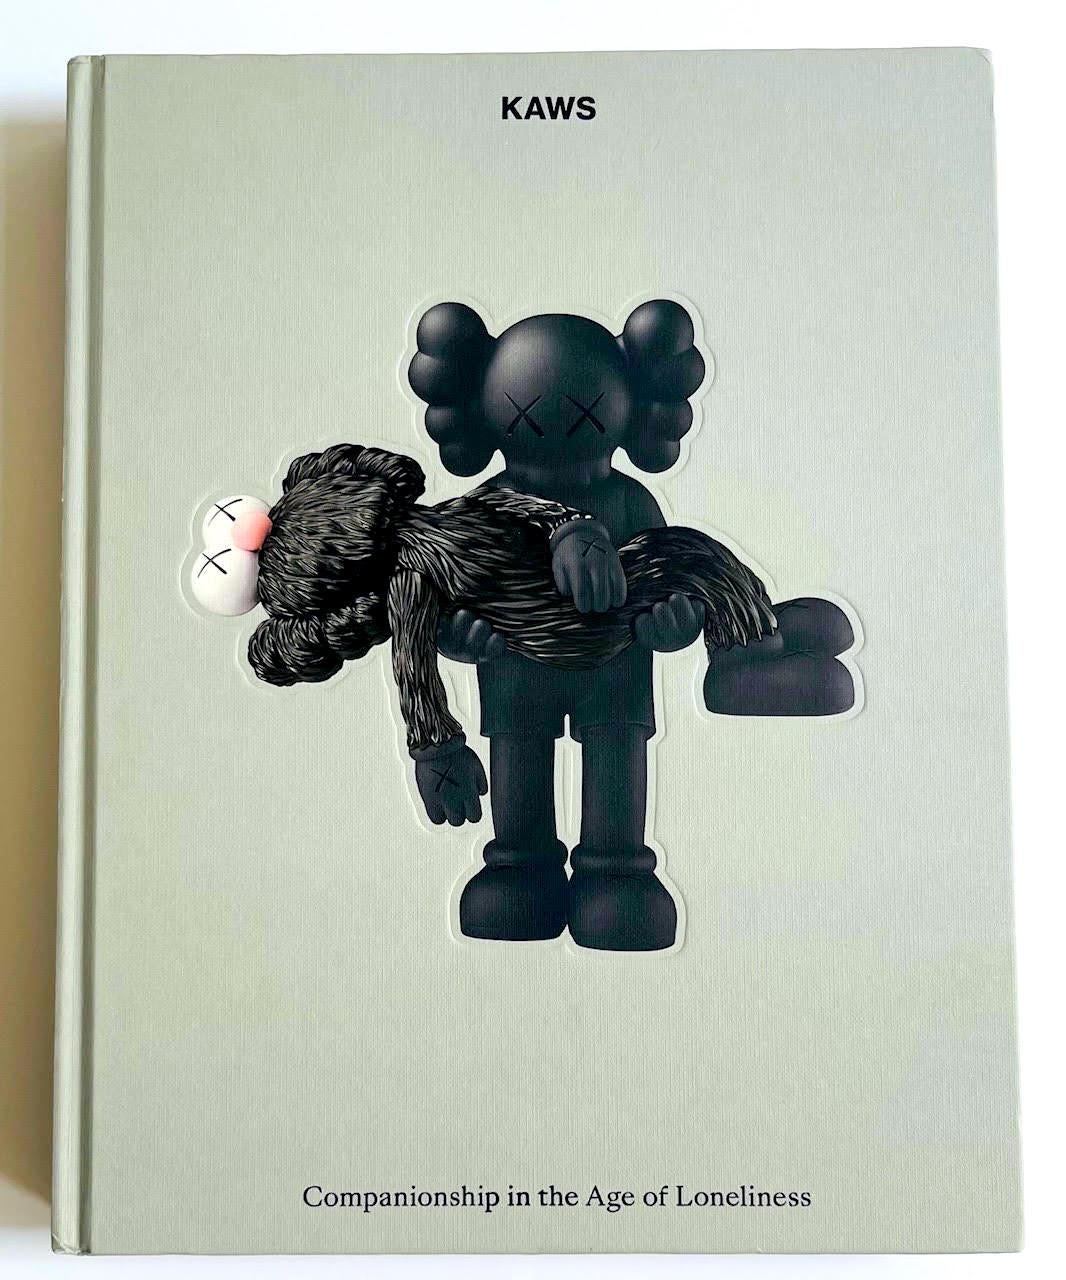 Original (unique) signed and dated drawing held in Australian monograph - Street Art Art by KAWS